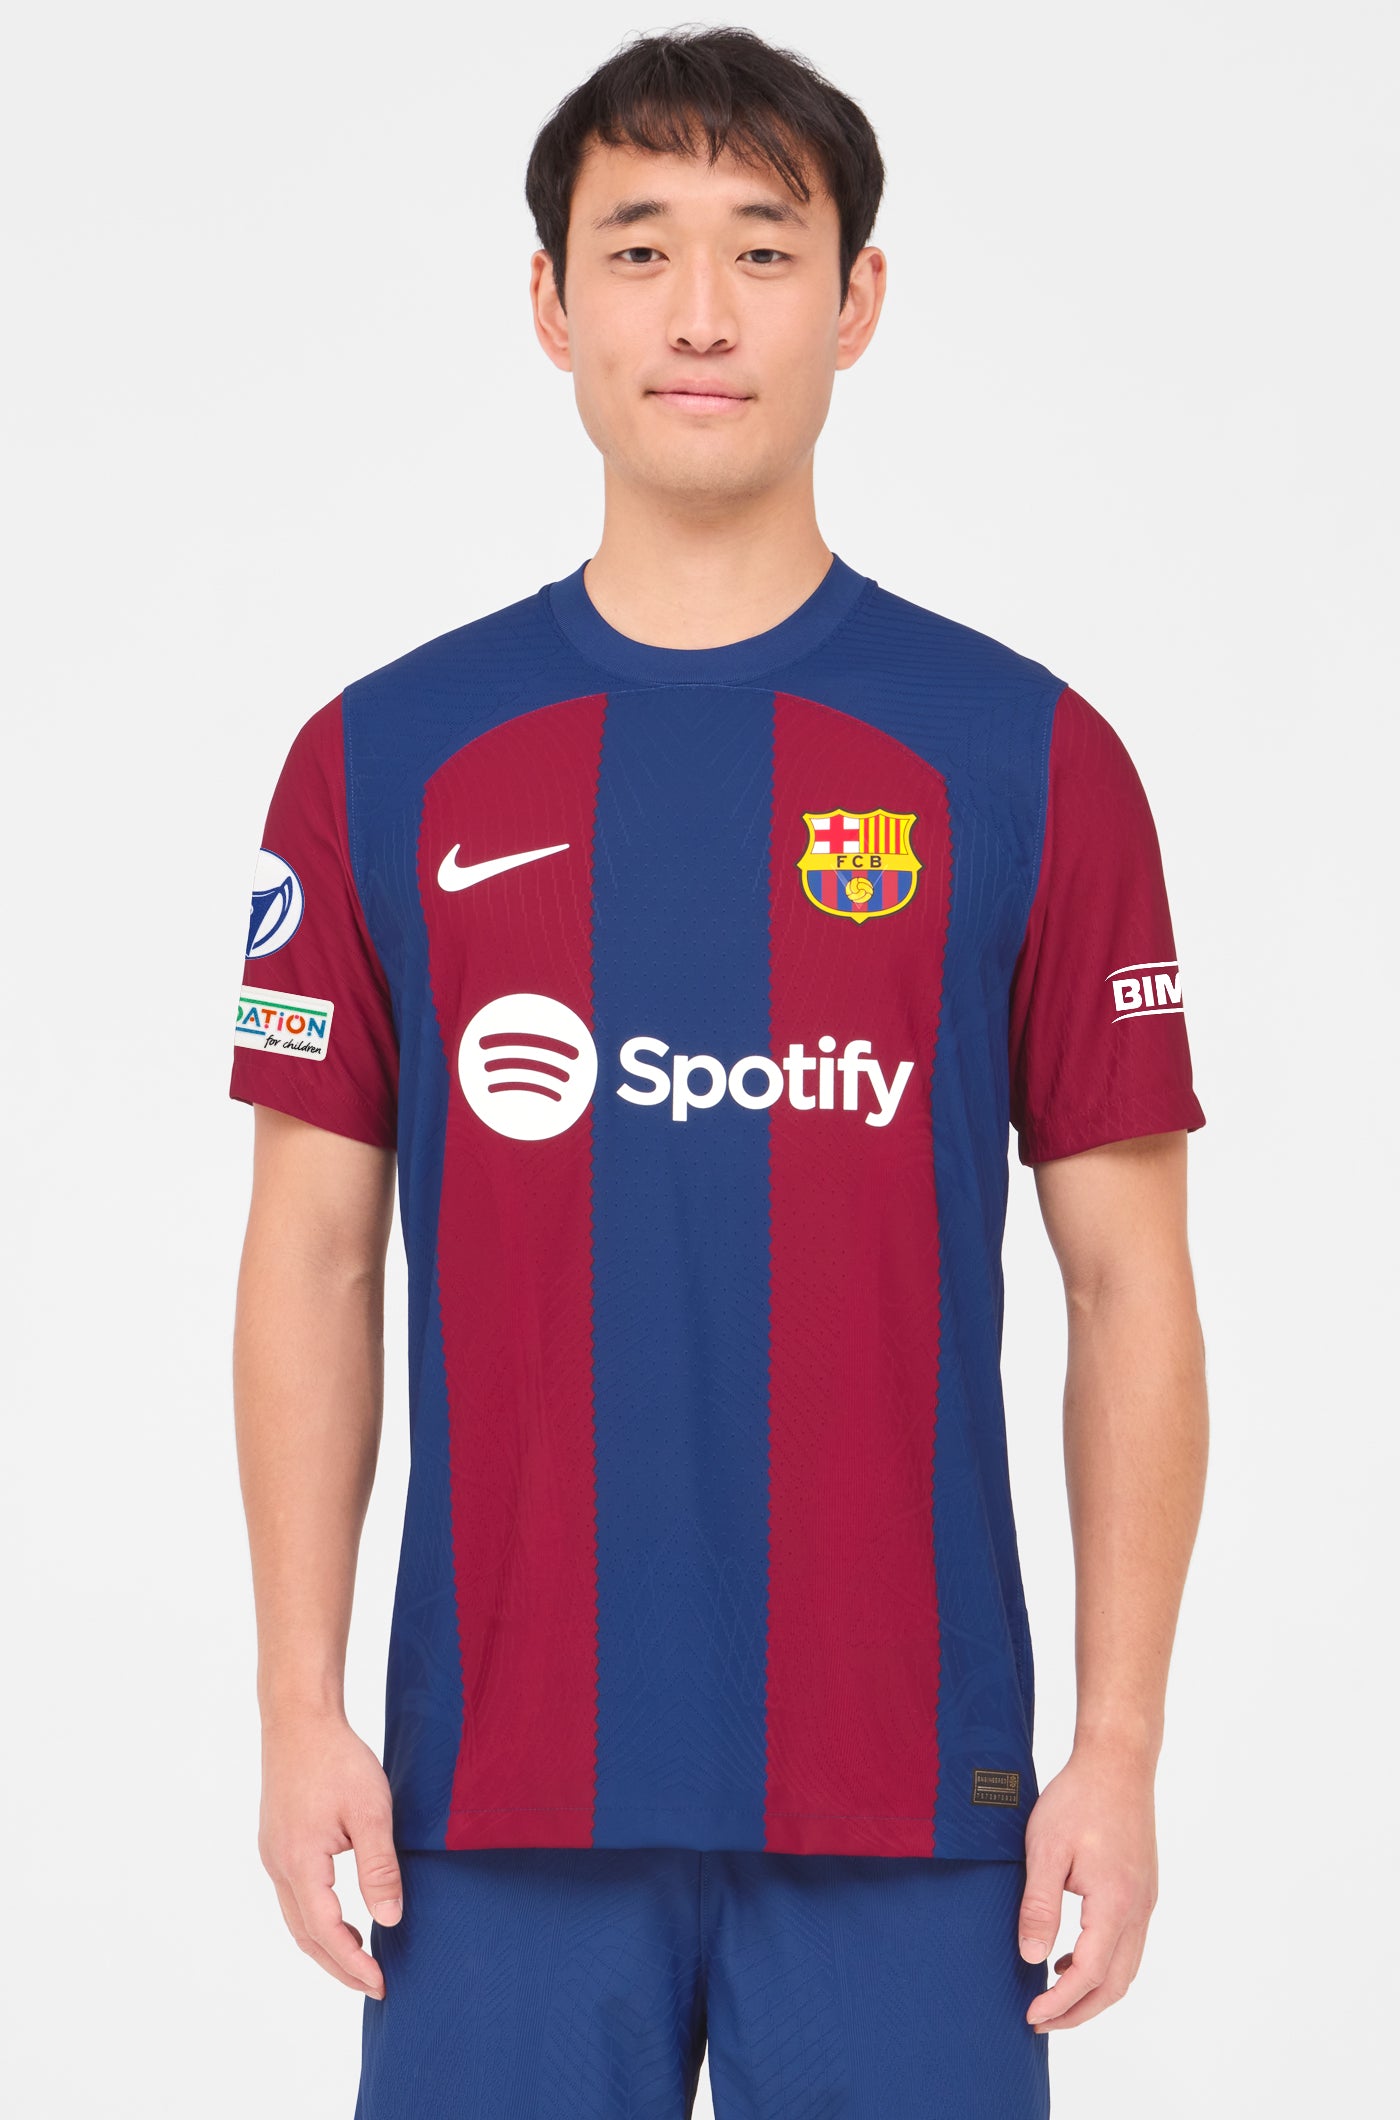 UWCL FC Barcelona home shirt 23/24 Player's Edition  - ALEXIA